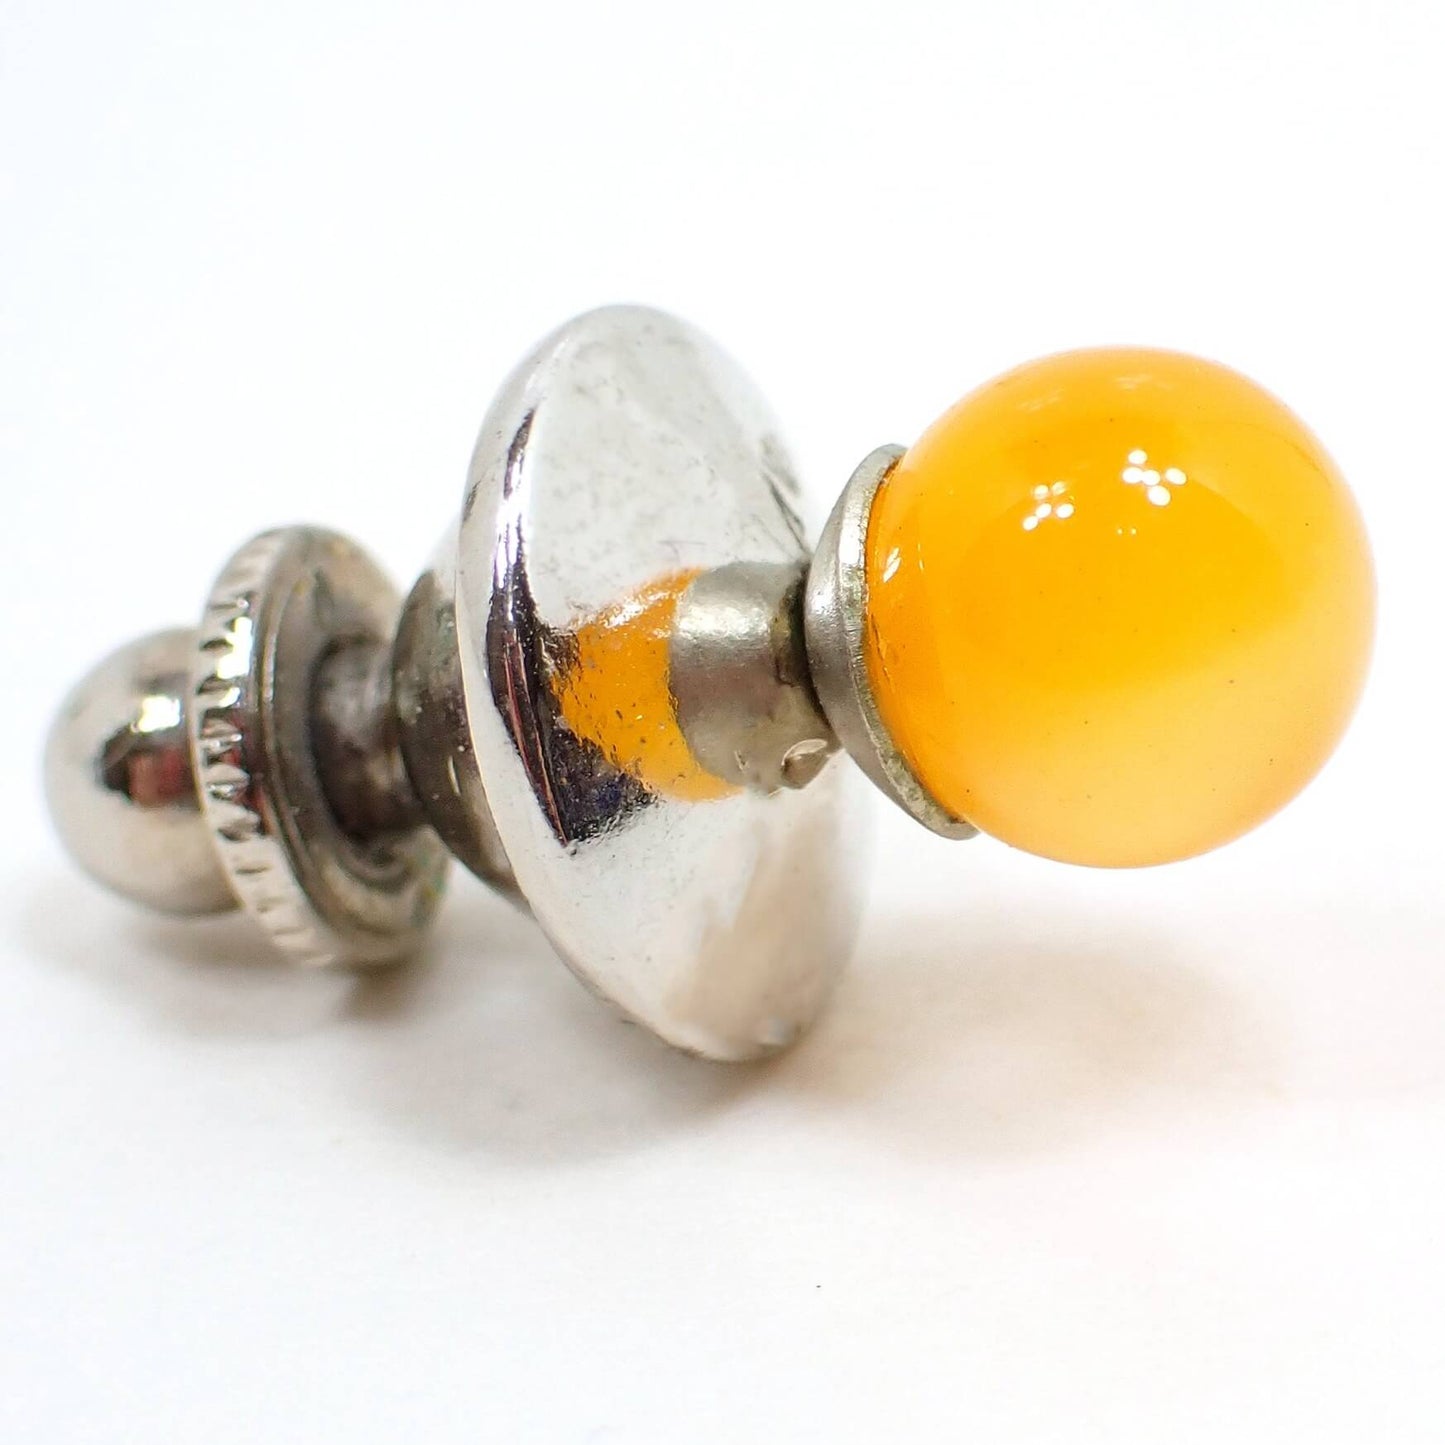 Angled side view of the Mid Century vintage moonglow lucite stud tie tack. The metal is silver tone plated in color. There is a round orange lucite sphere on the front. Moonglow lucite has an inner glow like appearance as you move around in the light.